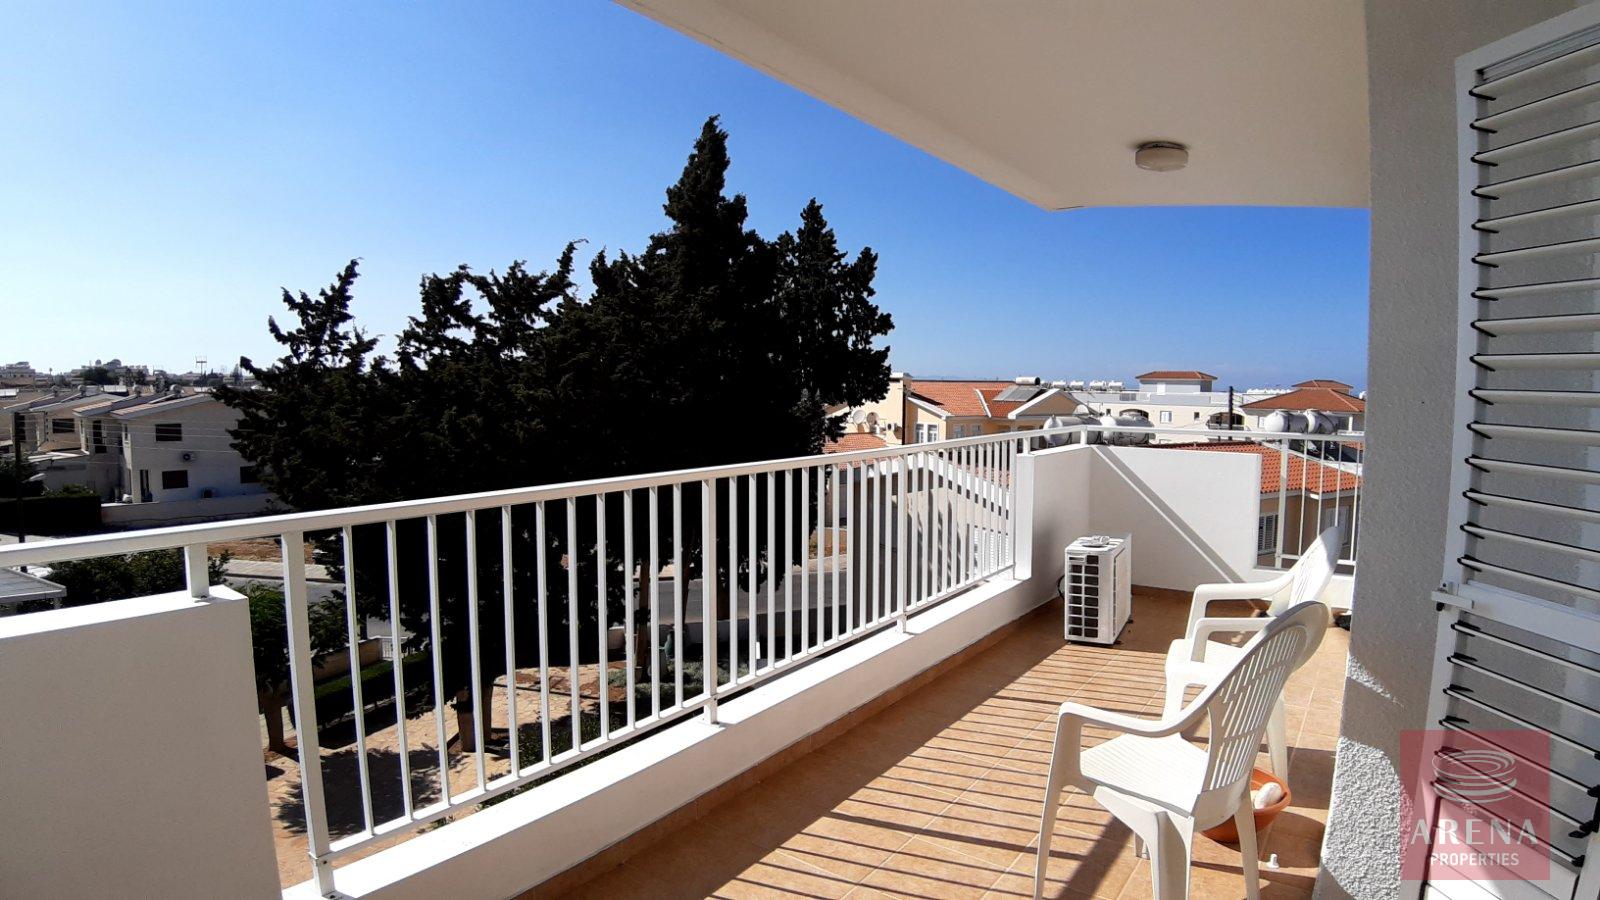 Apt for rent in Paralimni - balcony